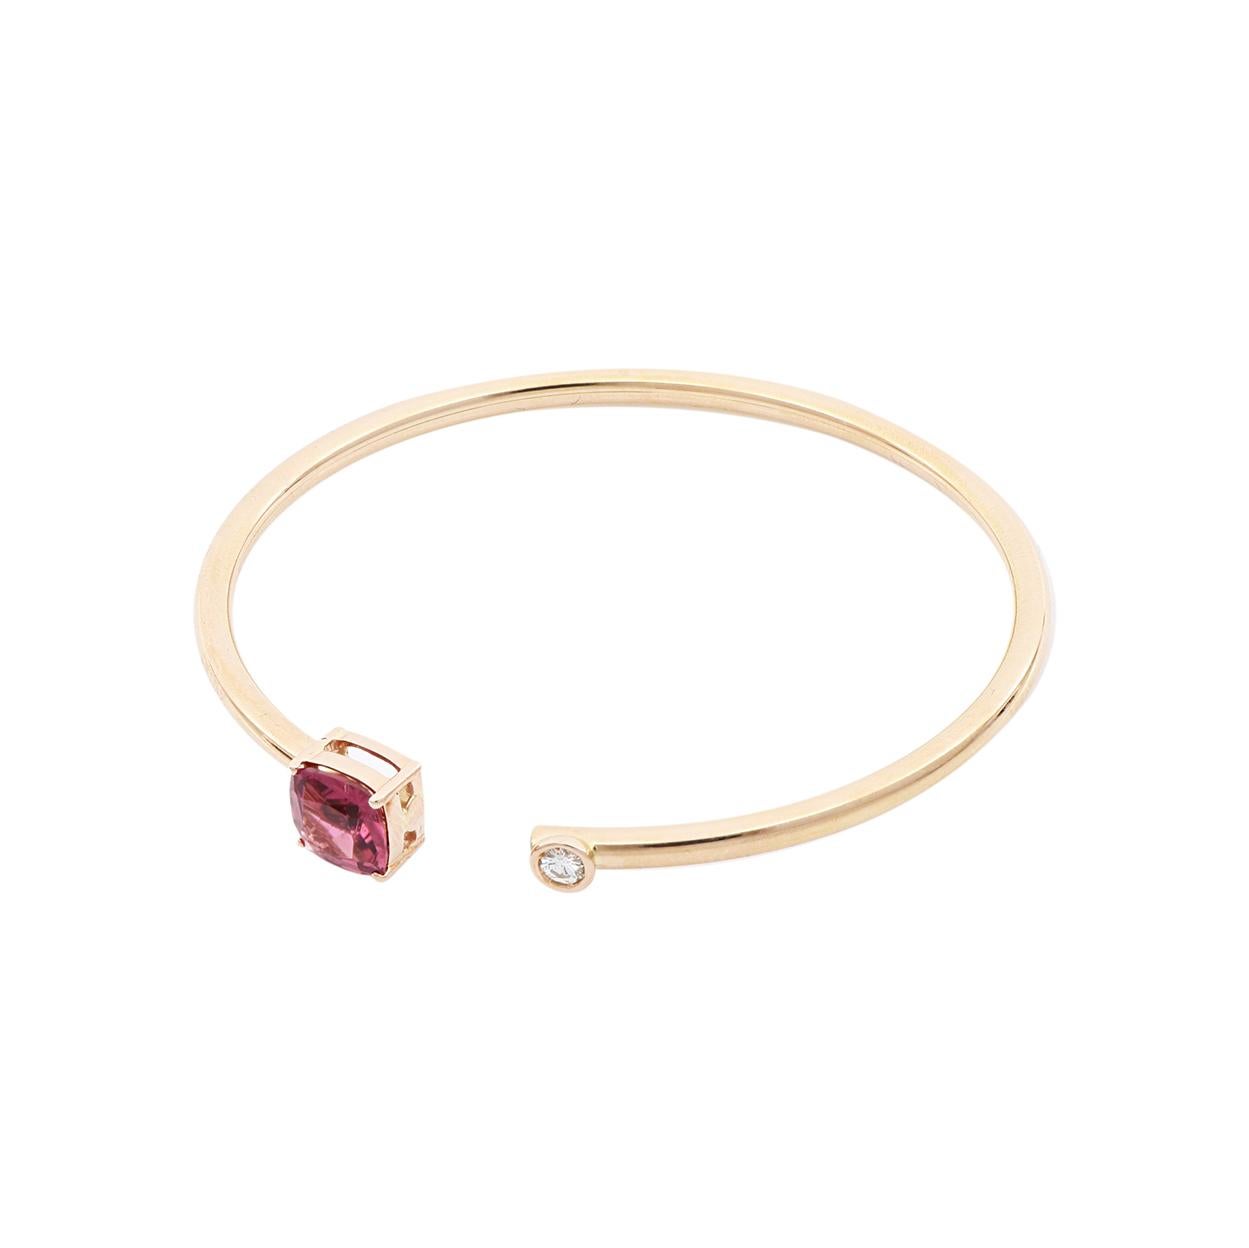 For a dainty, feminine look this bangle bracelet has all it takes: a sleek 18 Kt rose gold open-cuff with a square red tourmaline on one end and a round diamond on the other end. Tourmaline is the newer October birthstone that can help polarize